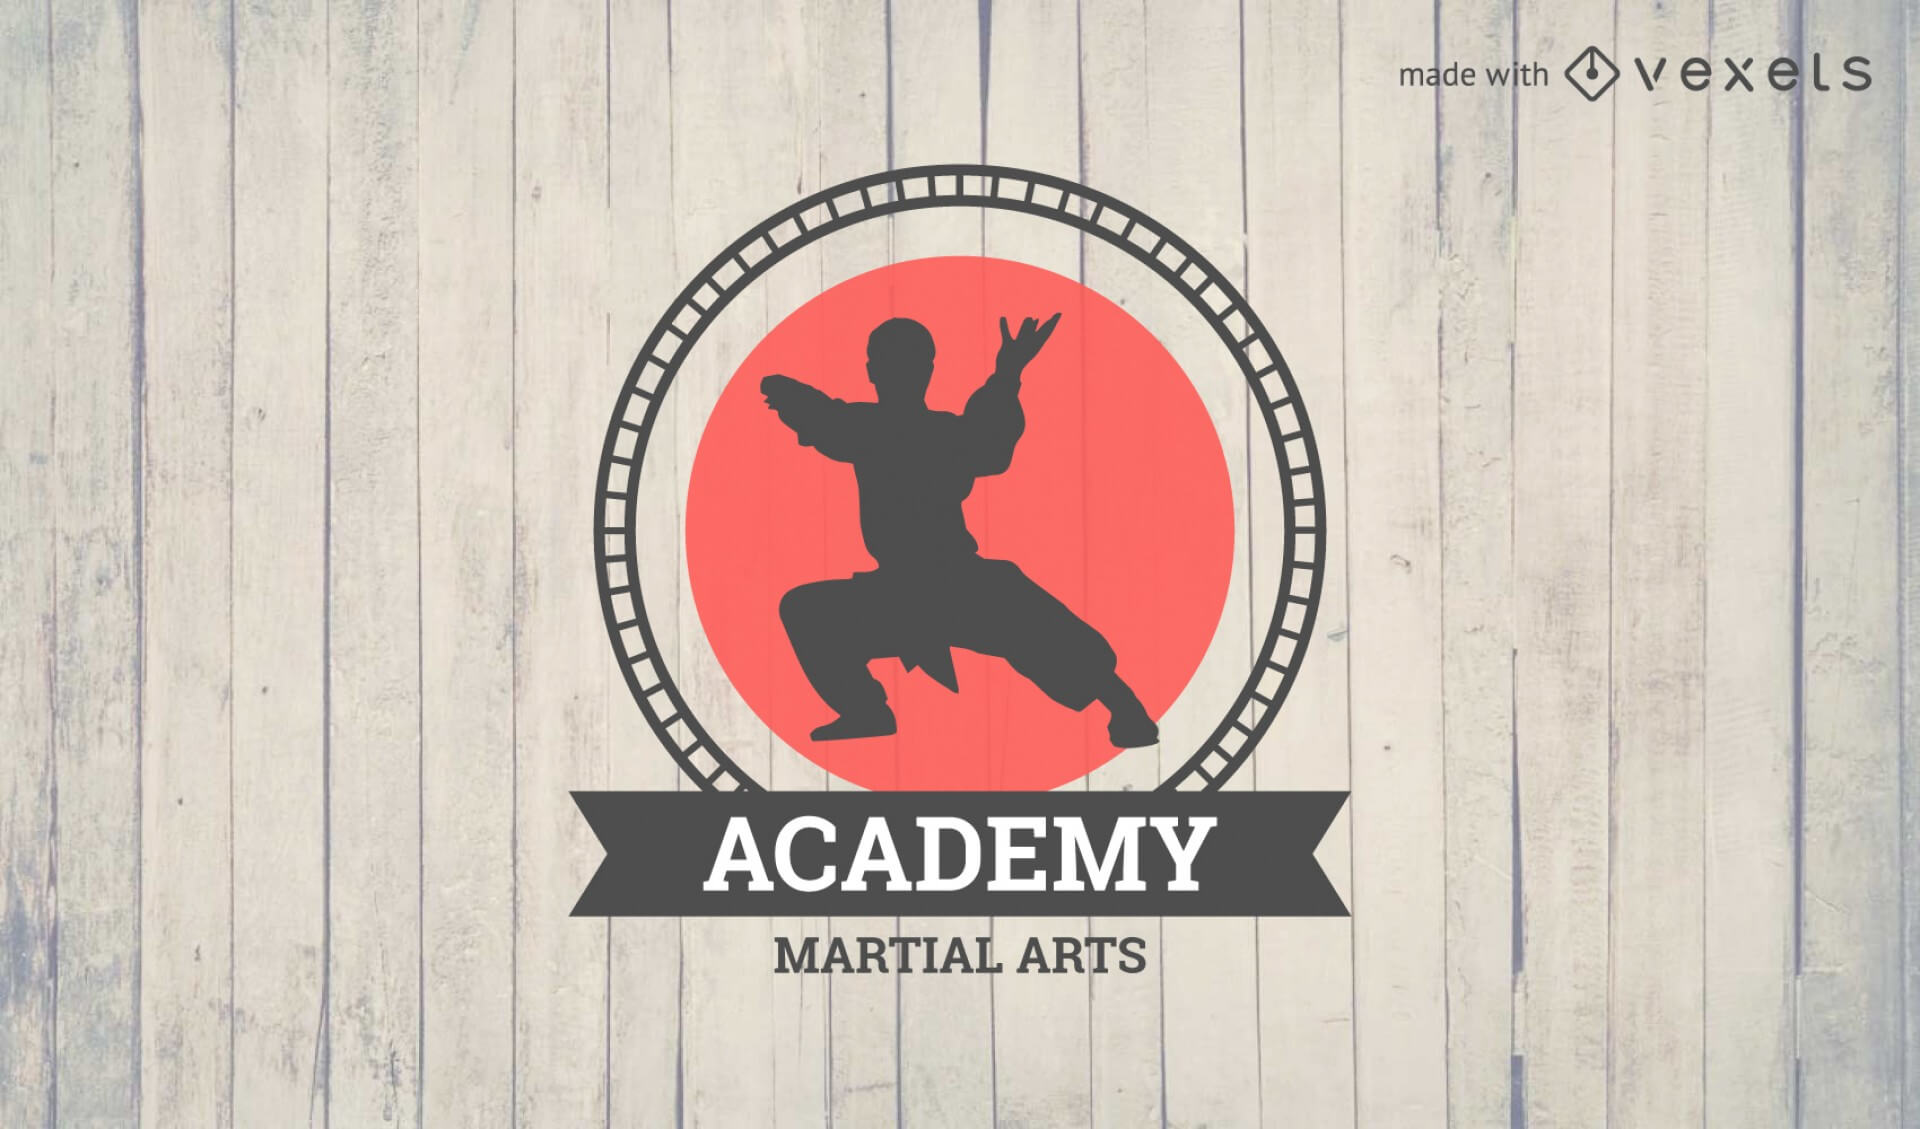 021 Martial Arts Certificate Templates Psd Template Stirring Throughout Walking Certificate Templates